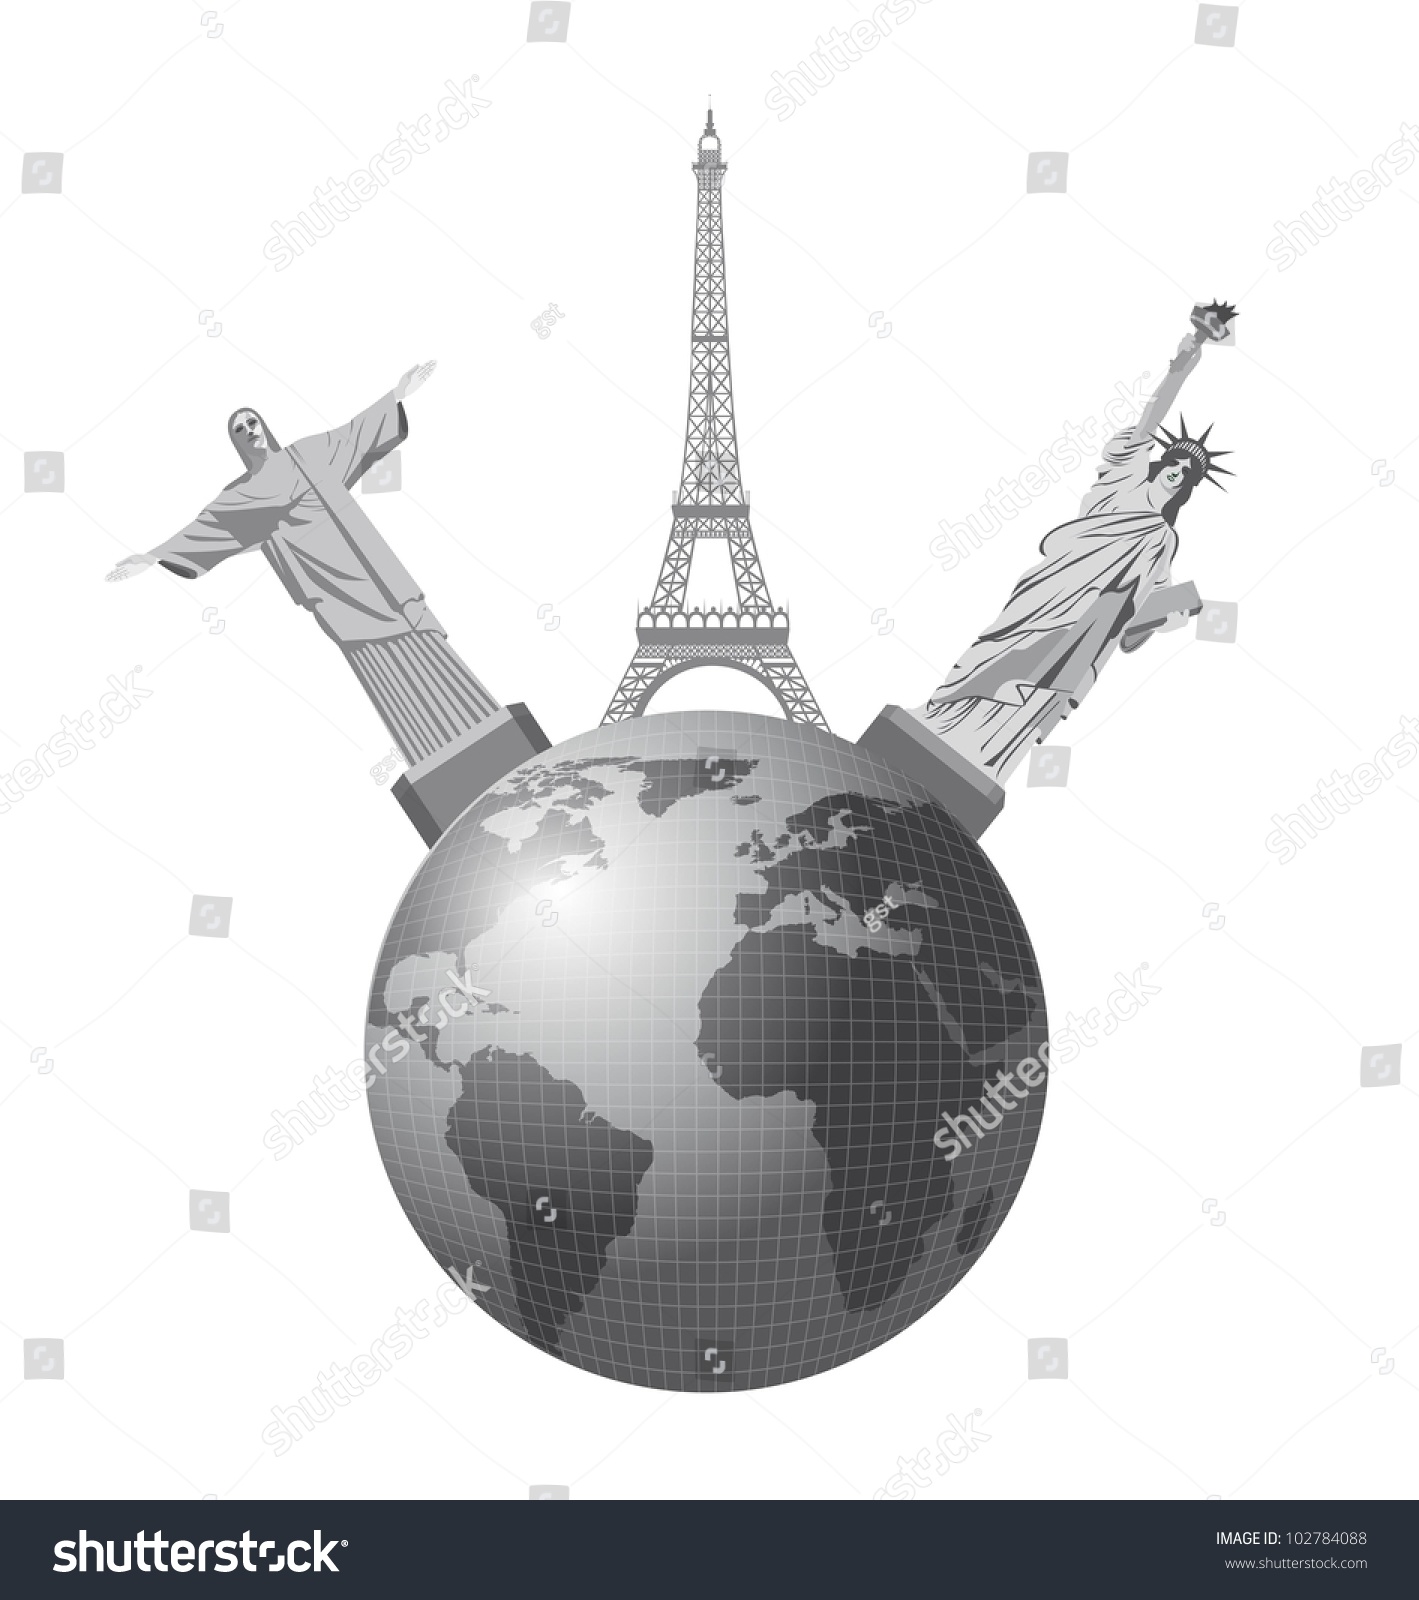 SVG of world monuments over earth isolated over white background. vector svg